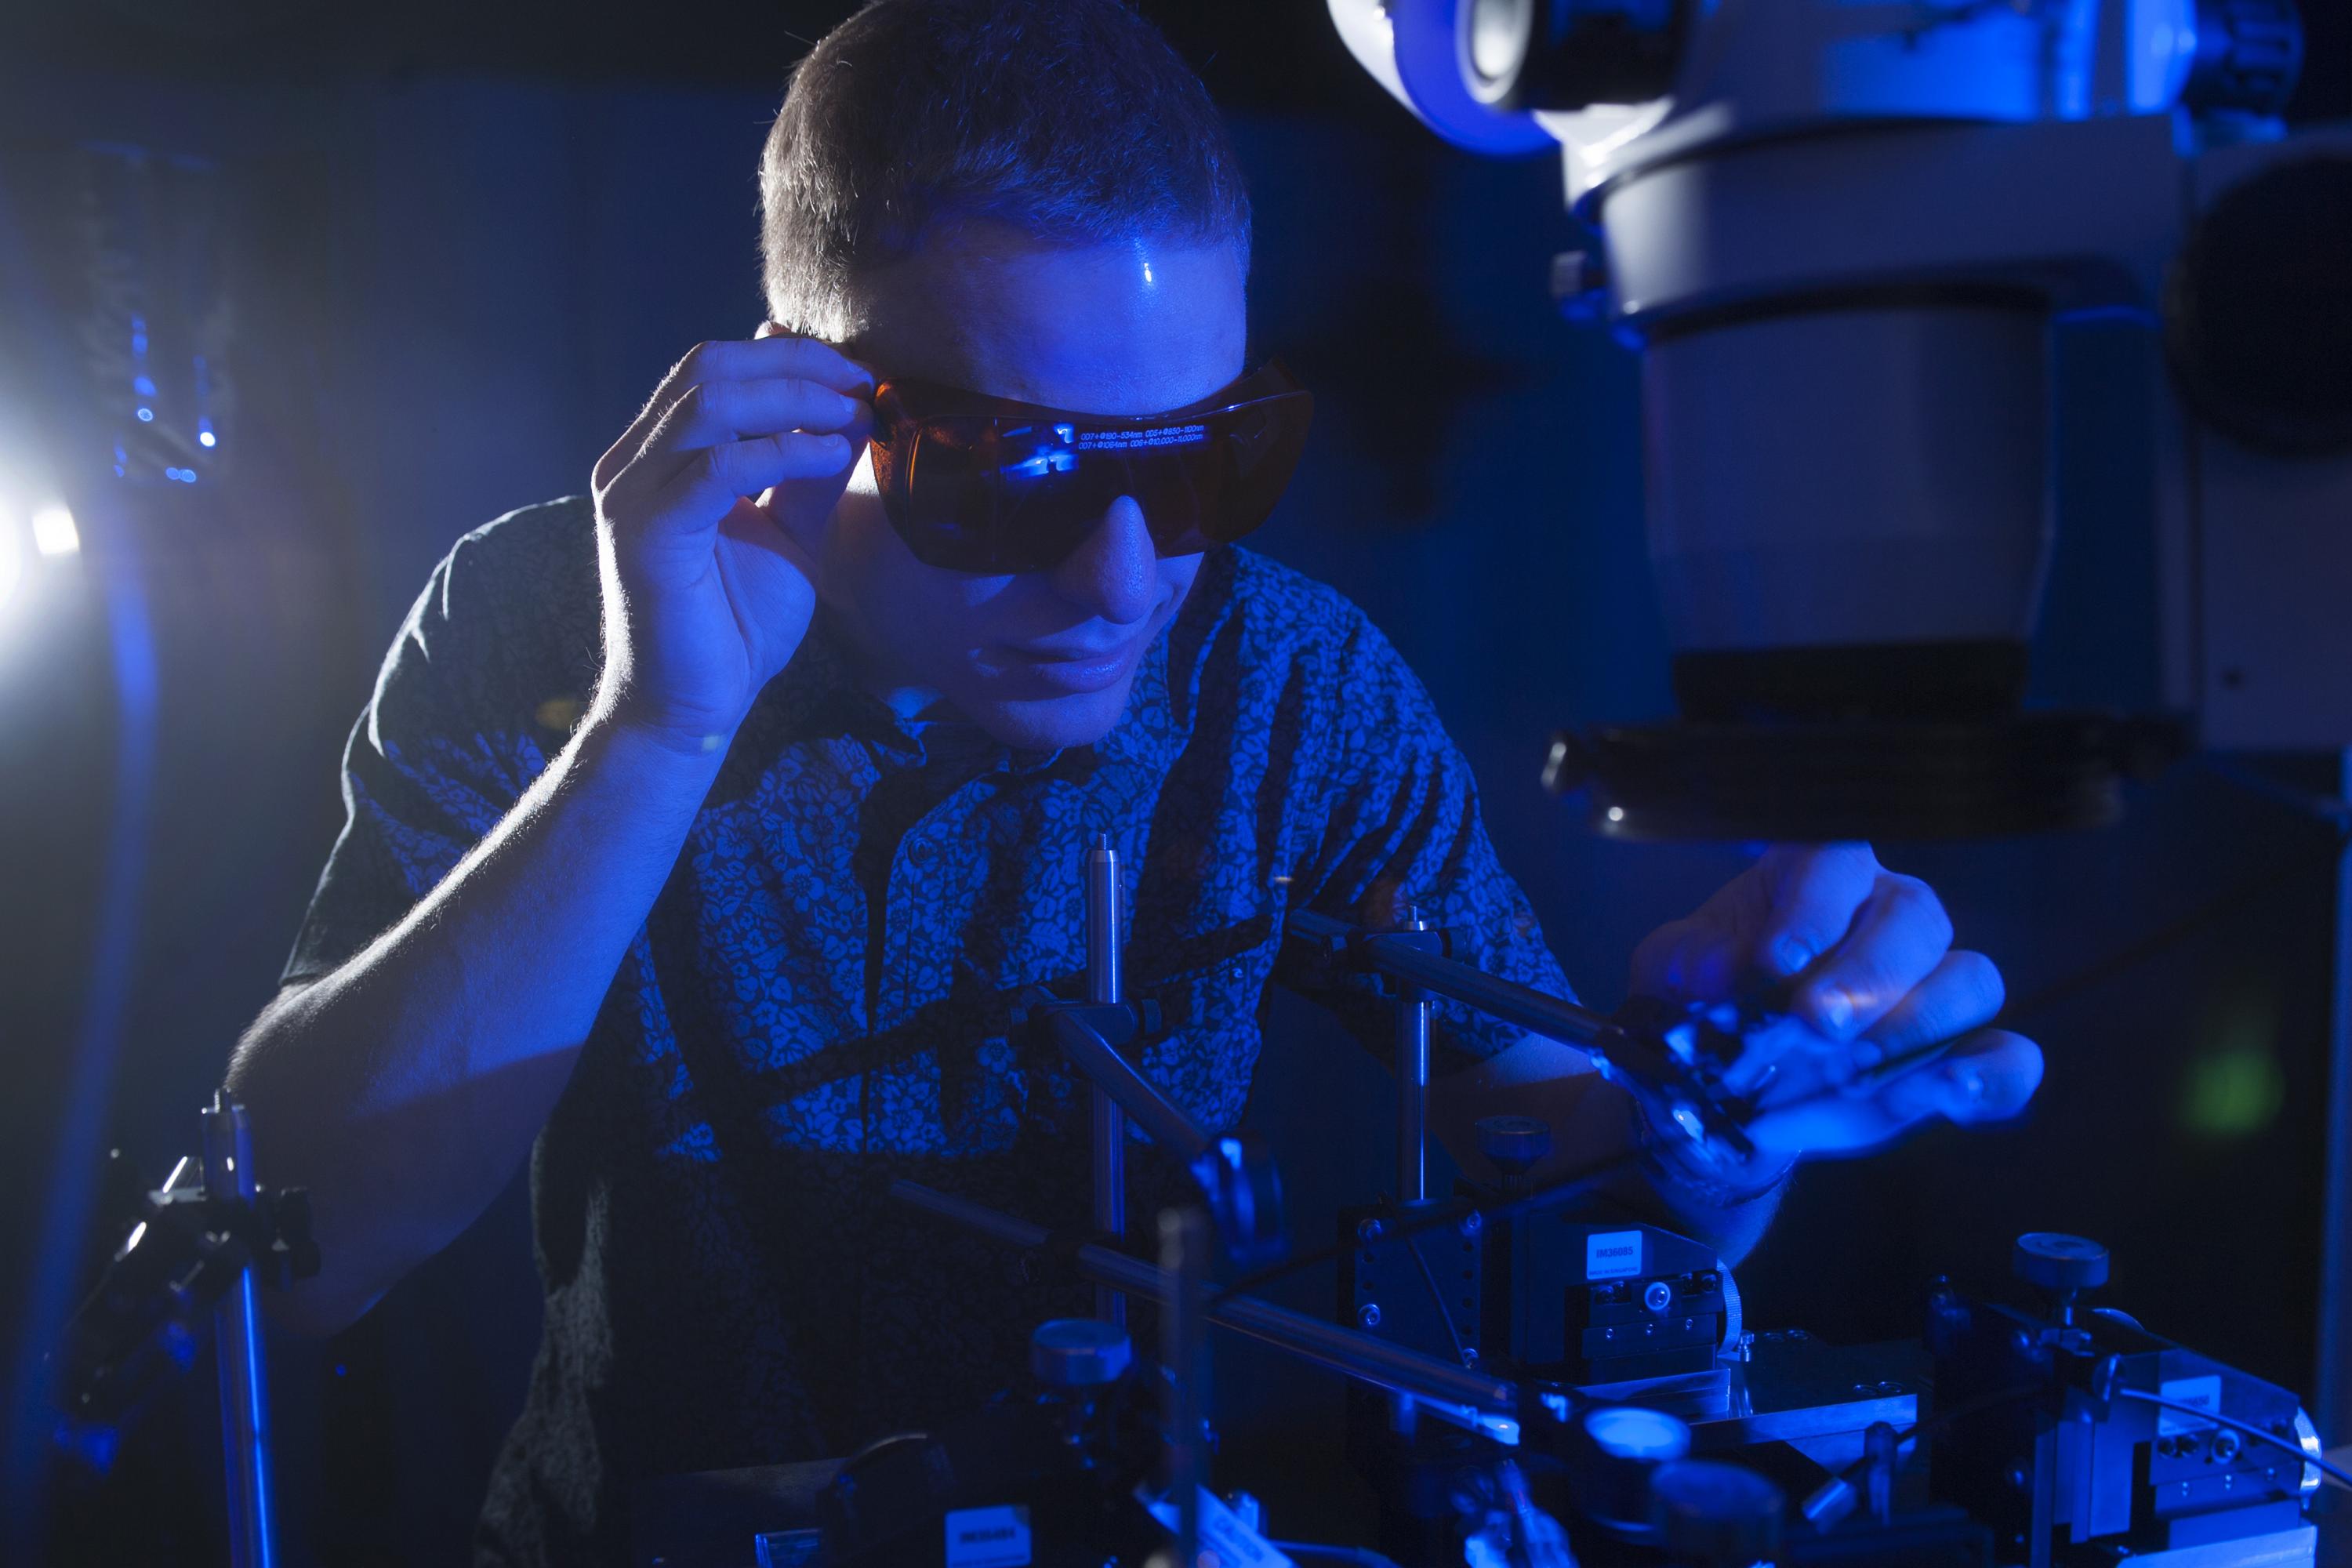 NSF Graduate Research Fellow Erik Anderson tests the conversion of blue light to electricity with a new higher efficiency rectenna design. (Credit: Christopher Moore, Georgia Tech)